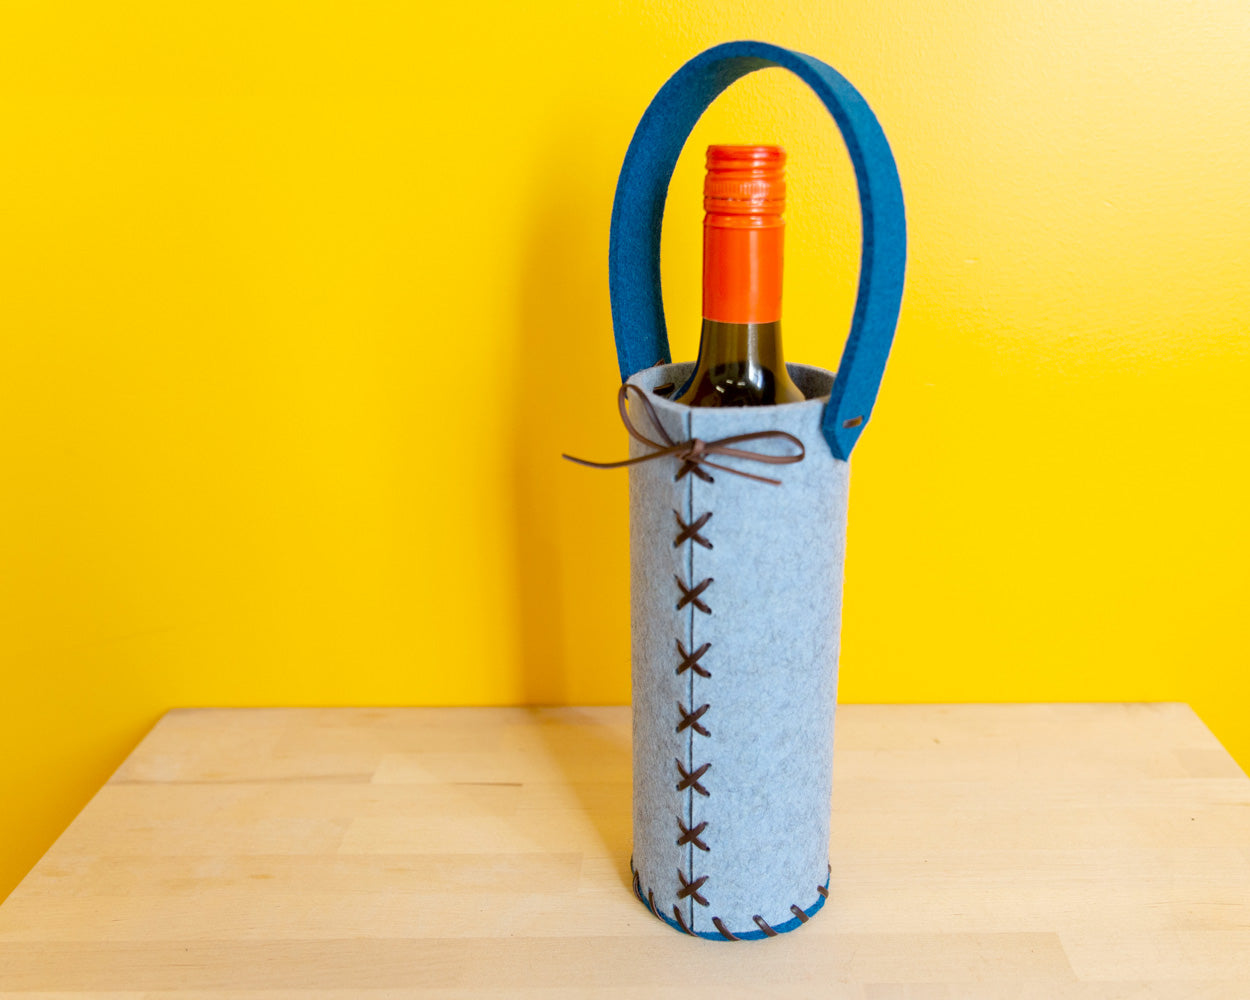 Side view of a light and dark blue felt wine tote with leather lacing and a dark wine bottle inside, against a yellow wall.